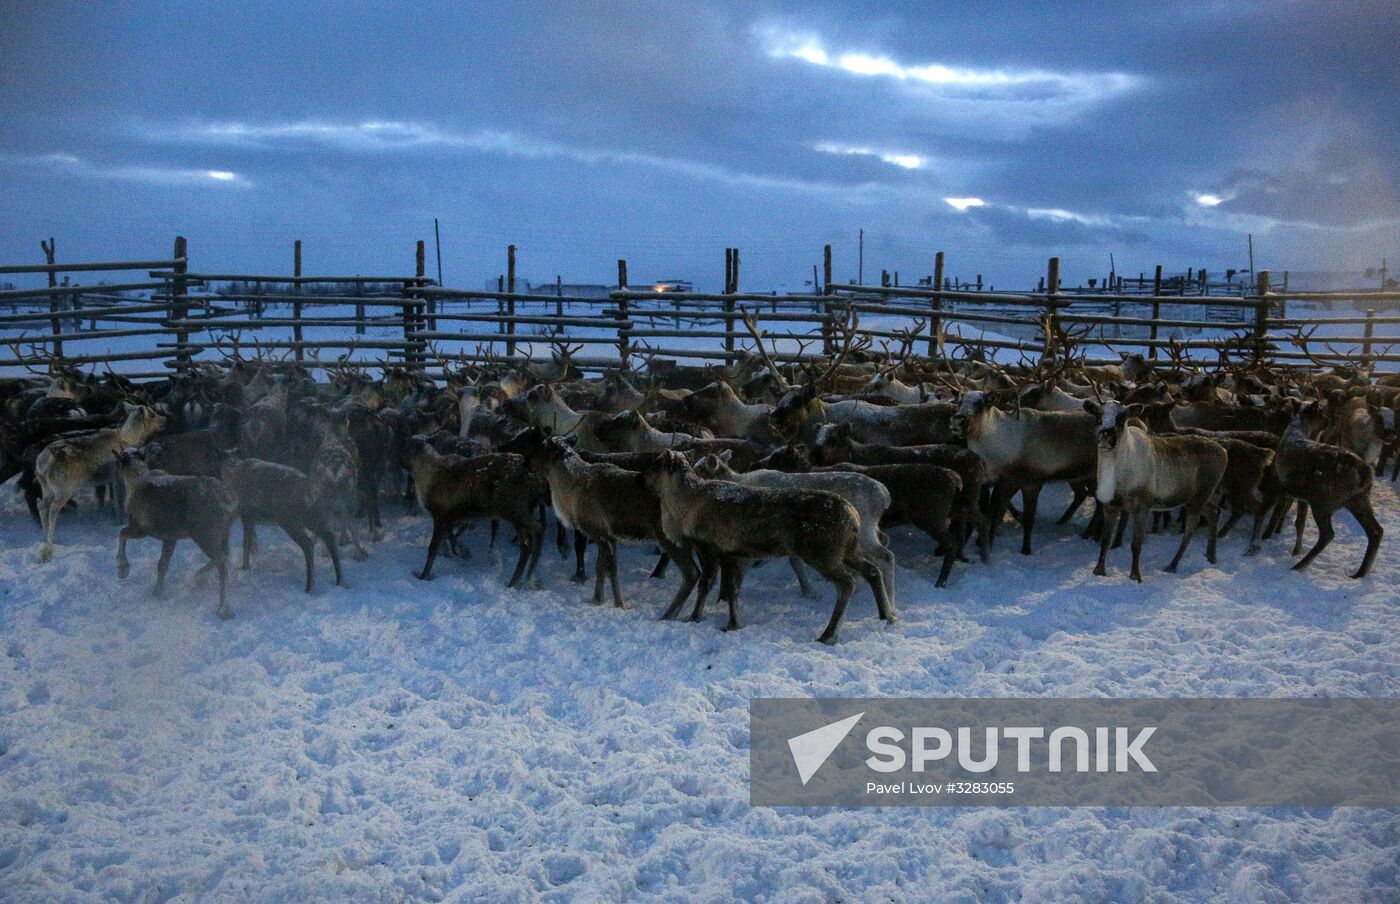 Tundra agricultural production cooperative in Murmansk Region